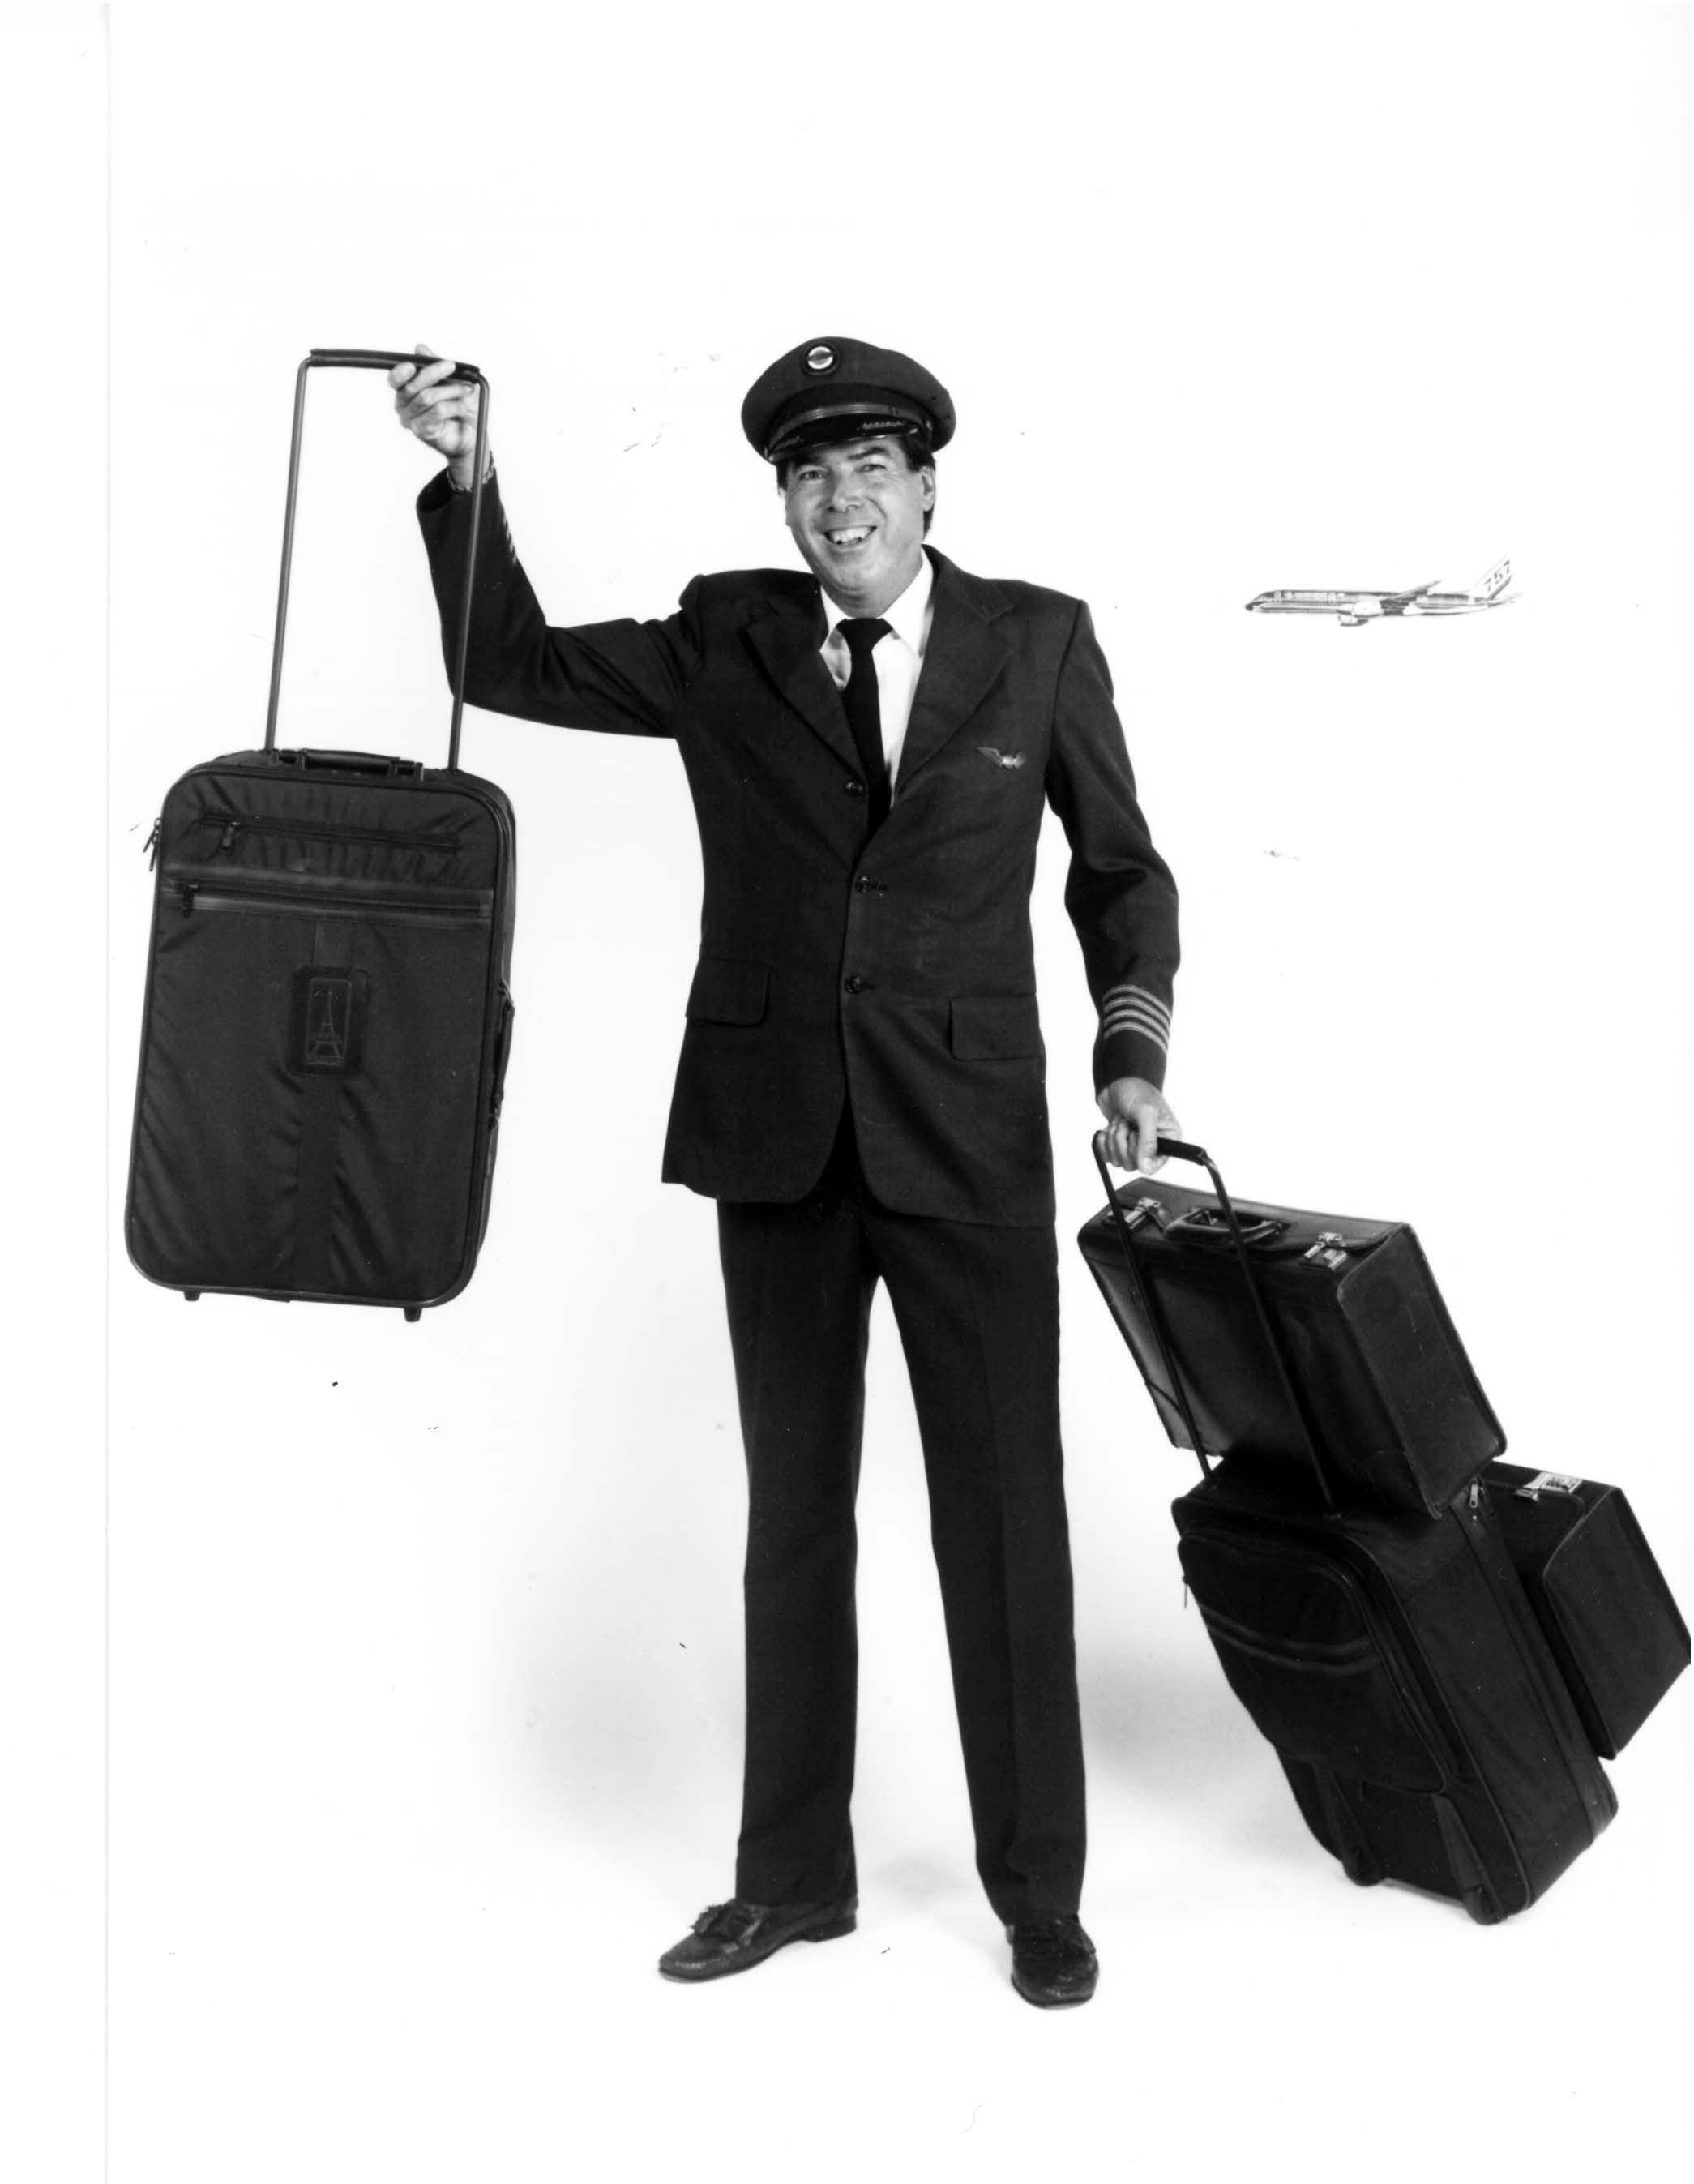 The Rolling Suitcase - by Jeffrey Rubel